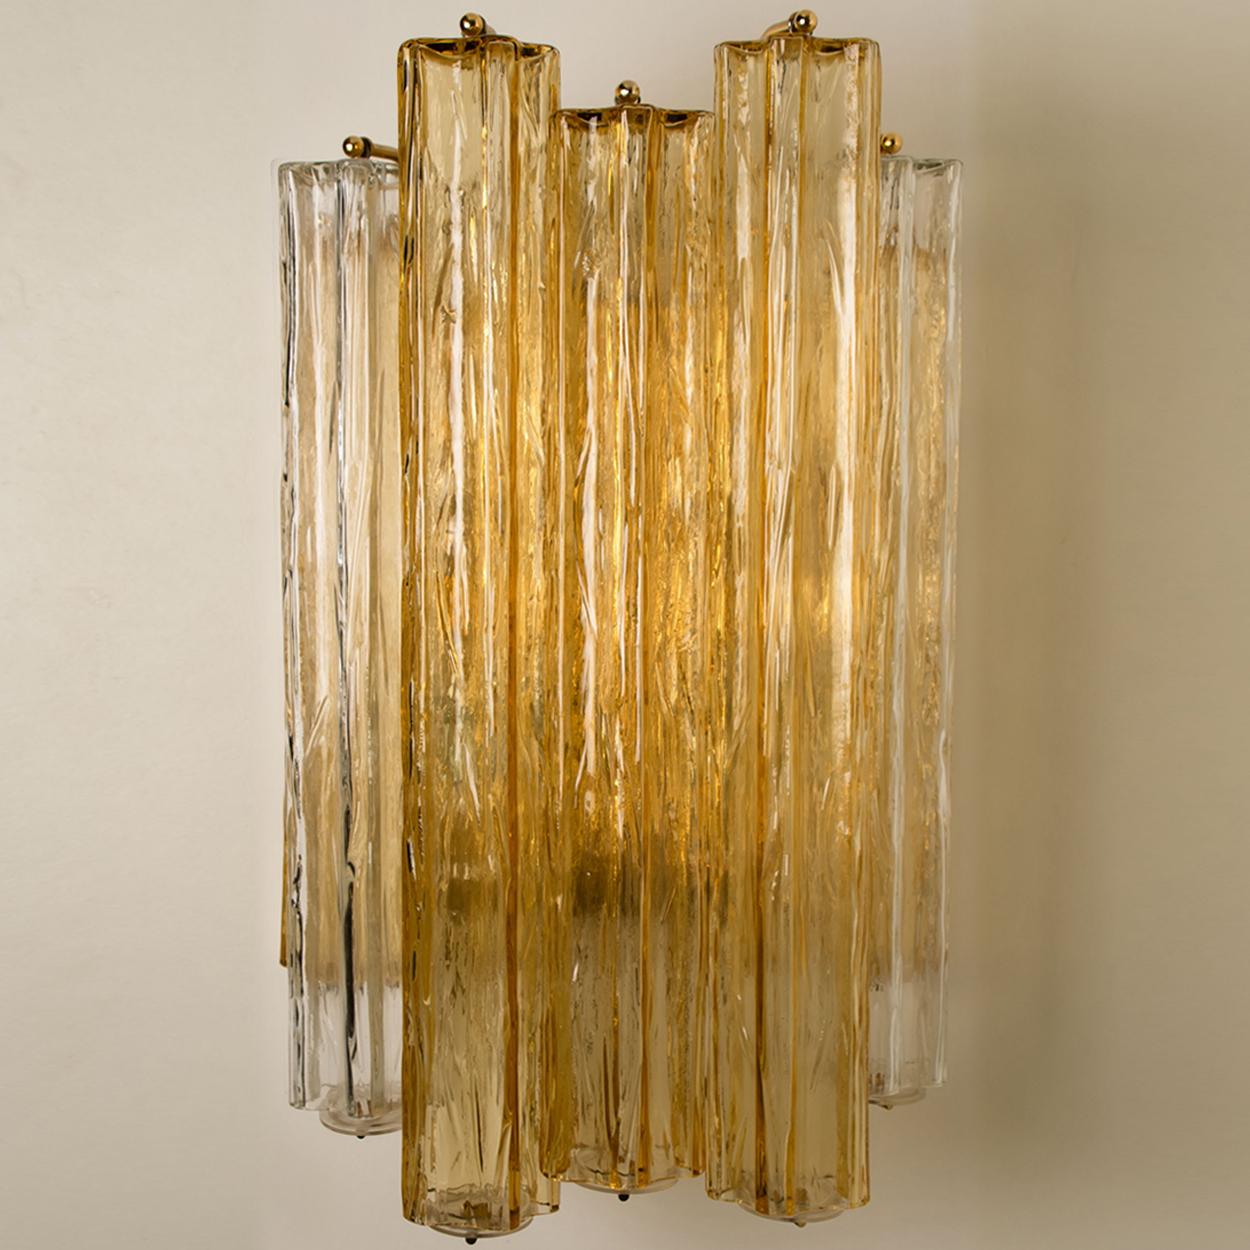 Italian 1 of the 2 Extra Large Wall Sconces or Wall Lights Murano Glass, Barovier & Toso